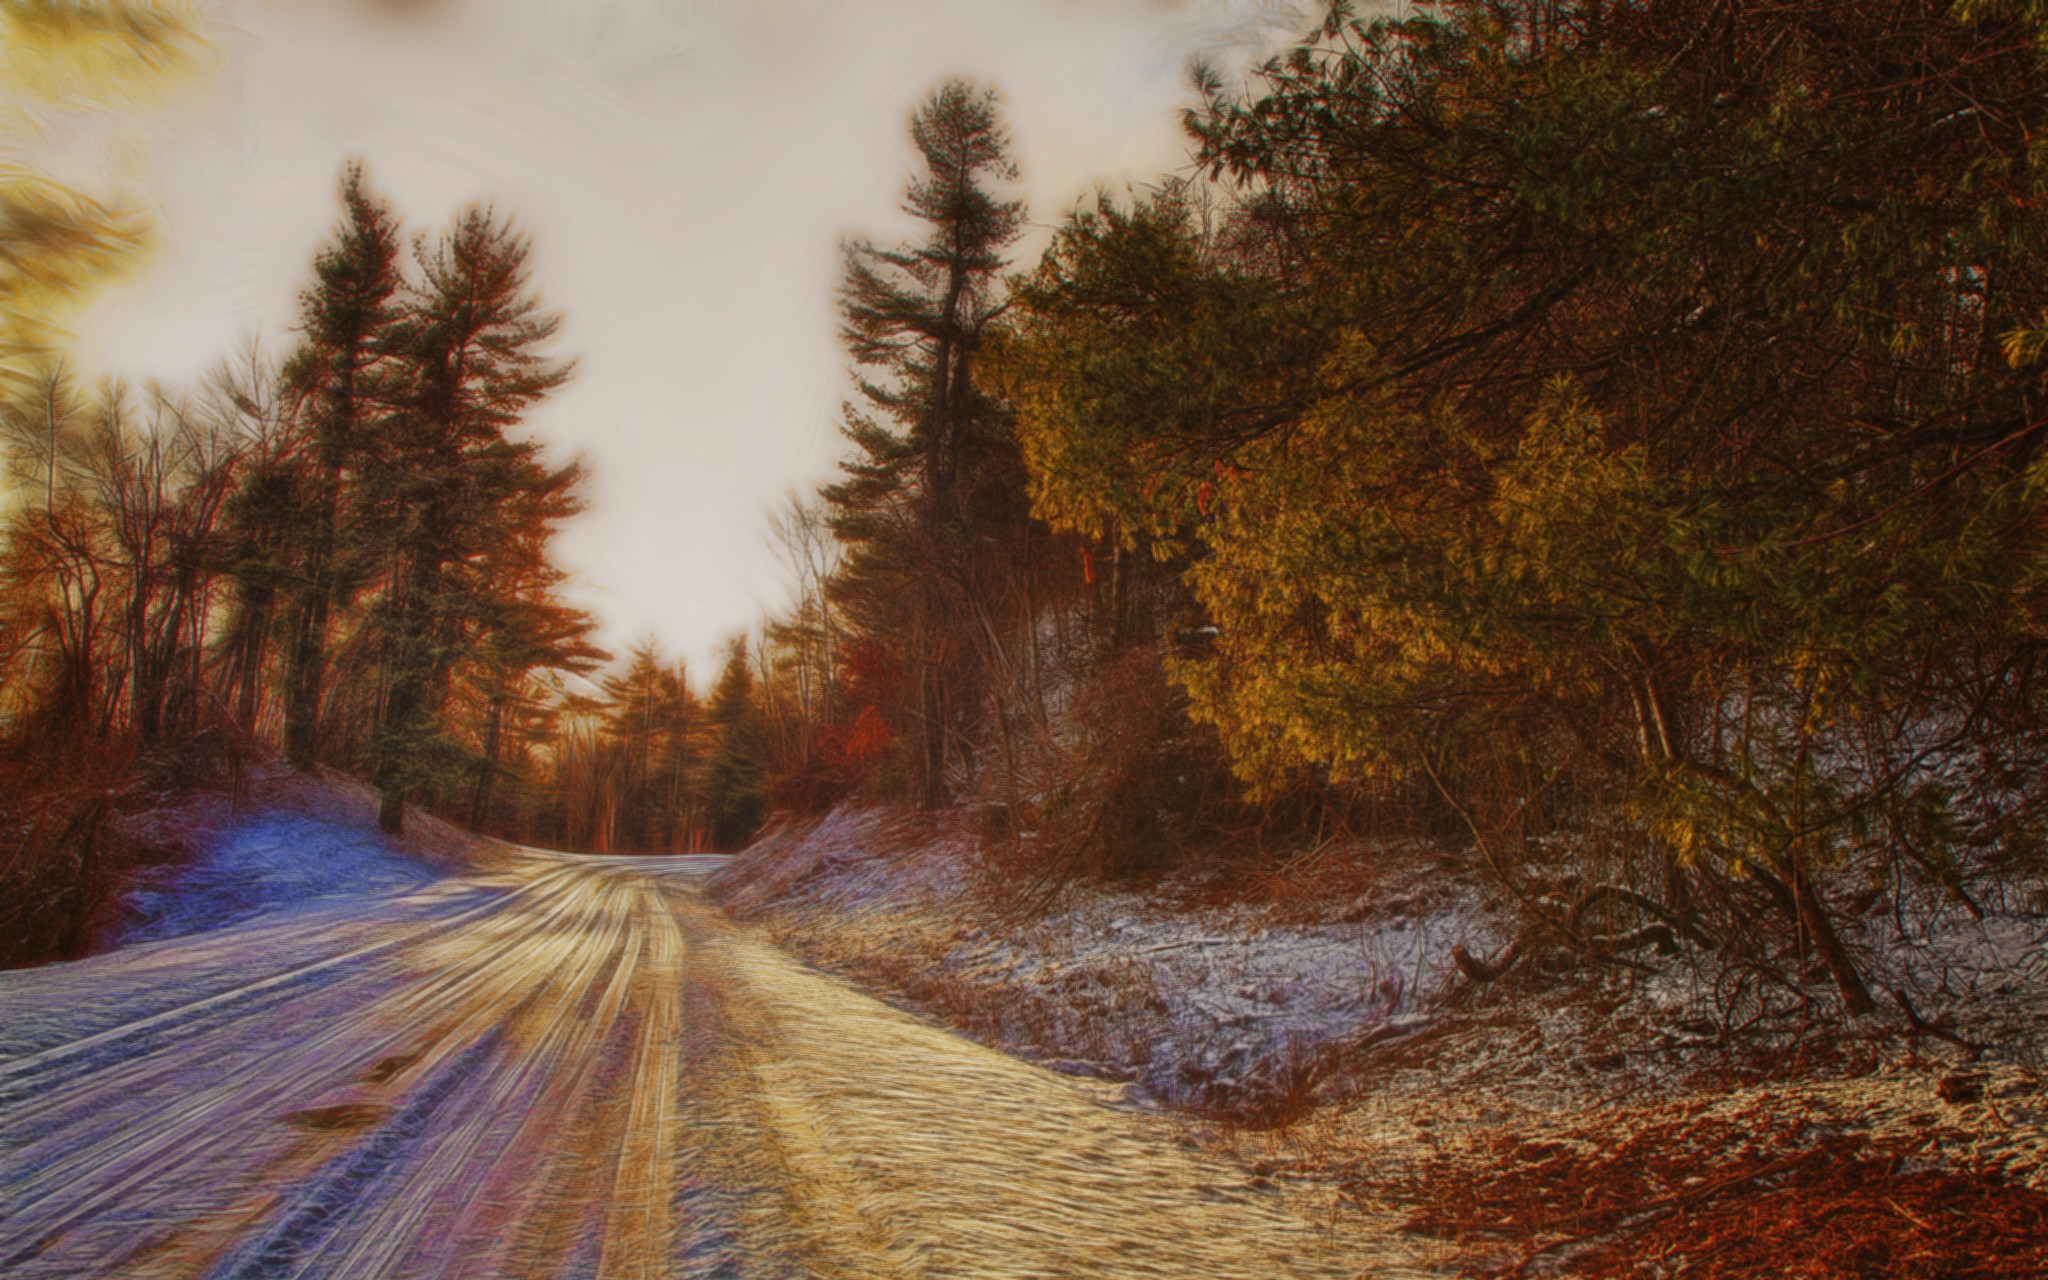 Image: A highly saturated photo of a road bending through a pine forest in winter